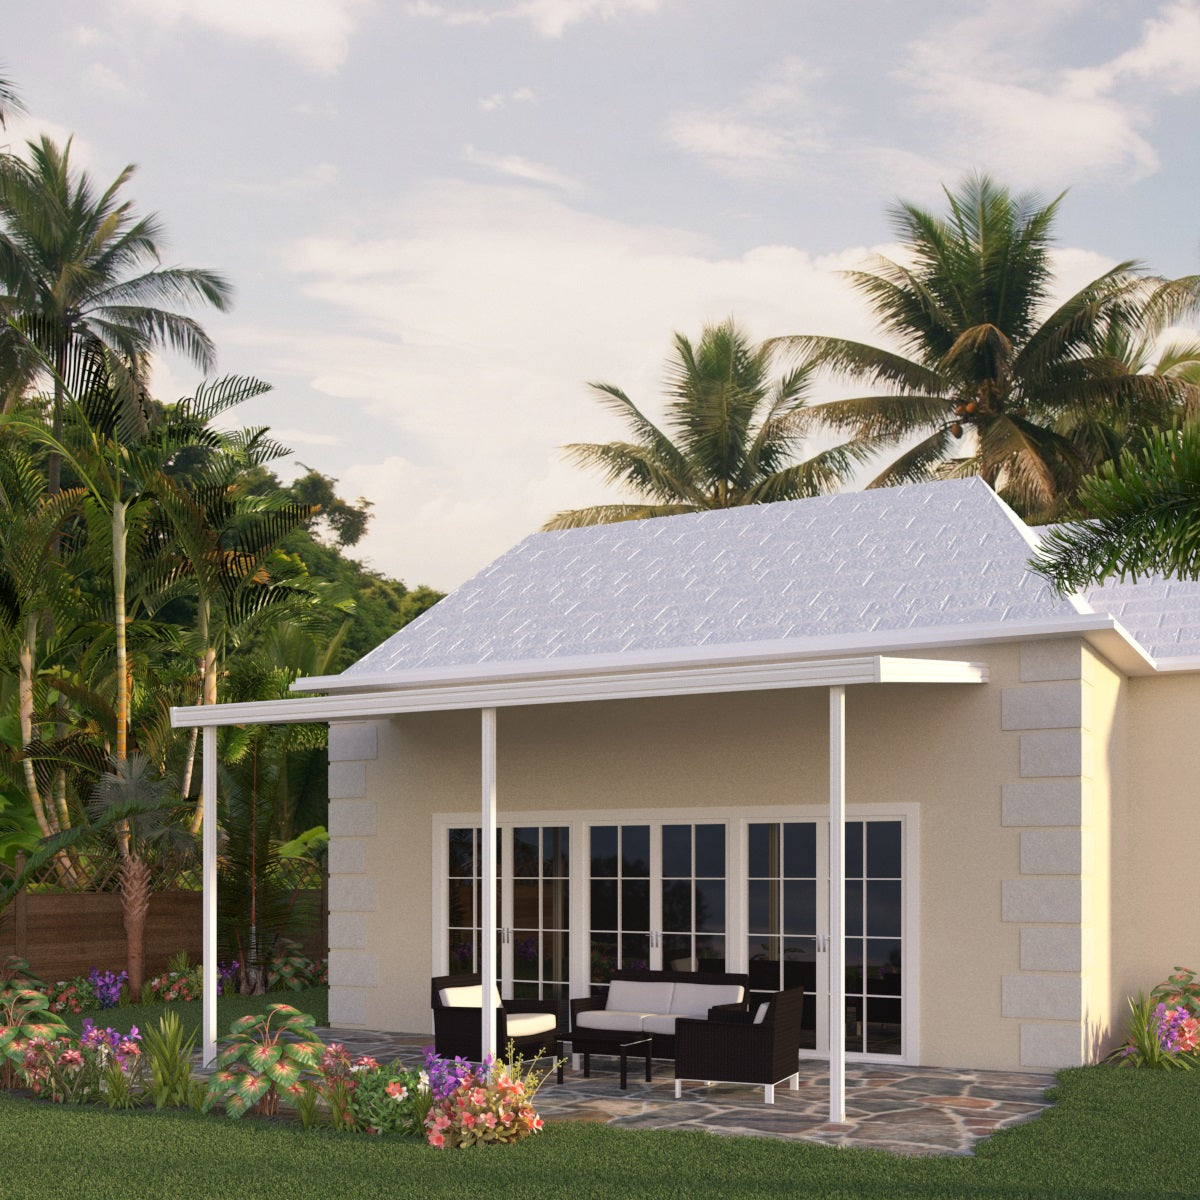 10 ft. Deep x 20 ft. Wide White Attached Aluminum Patio Cover - 3 Posts - (10lb Low Snow Area)